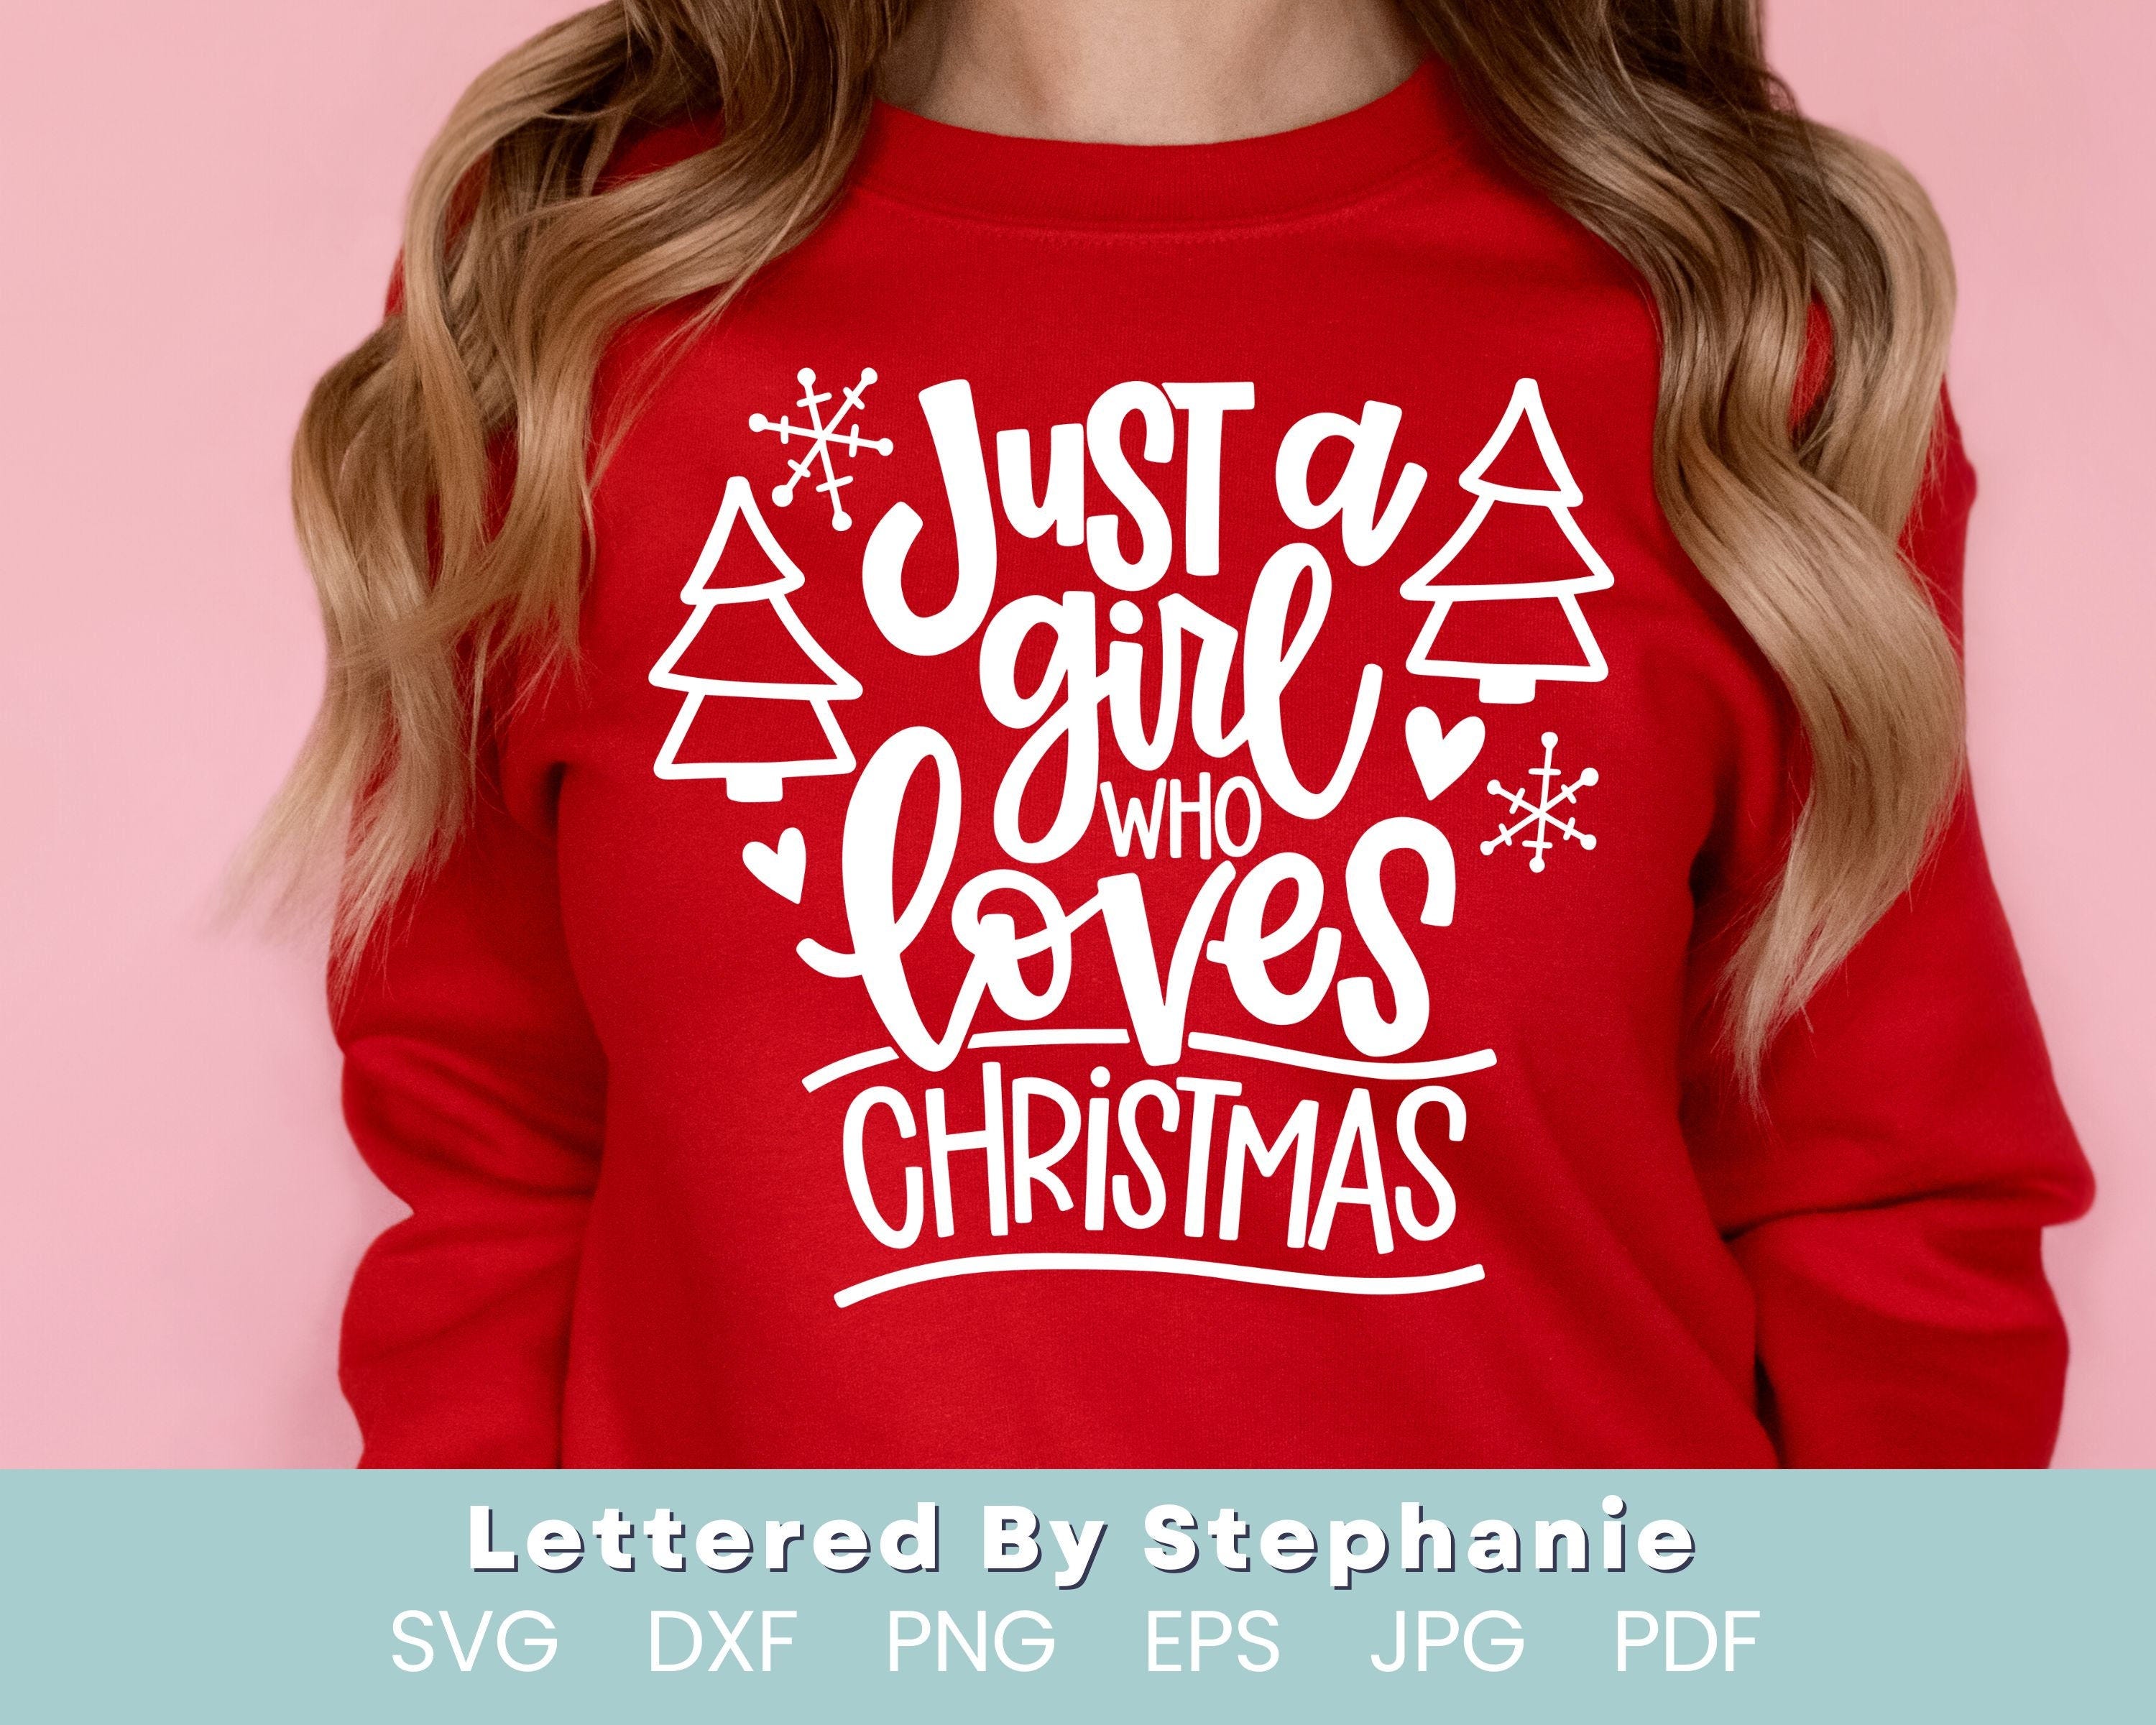 Just a girl who loves Christmas SVG Cut File, cute Christmas shirt design, Christmas lover svg, for the girl who loves Christmas, cricut svg